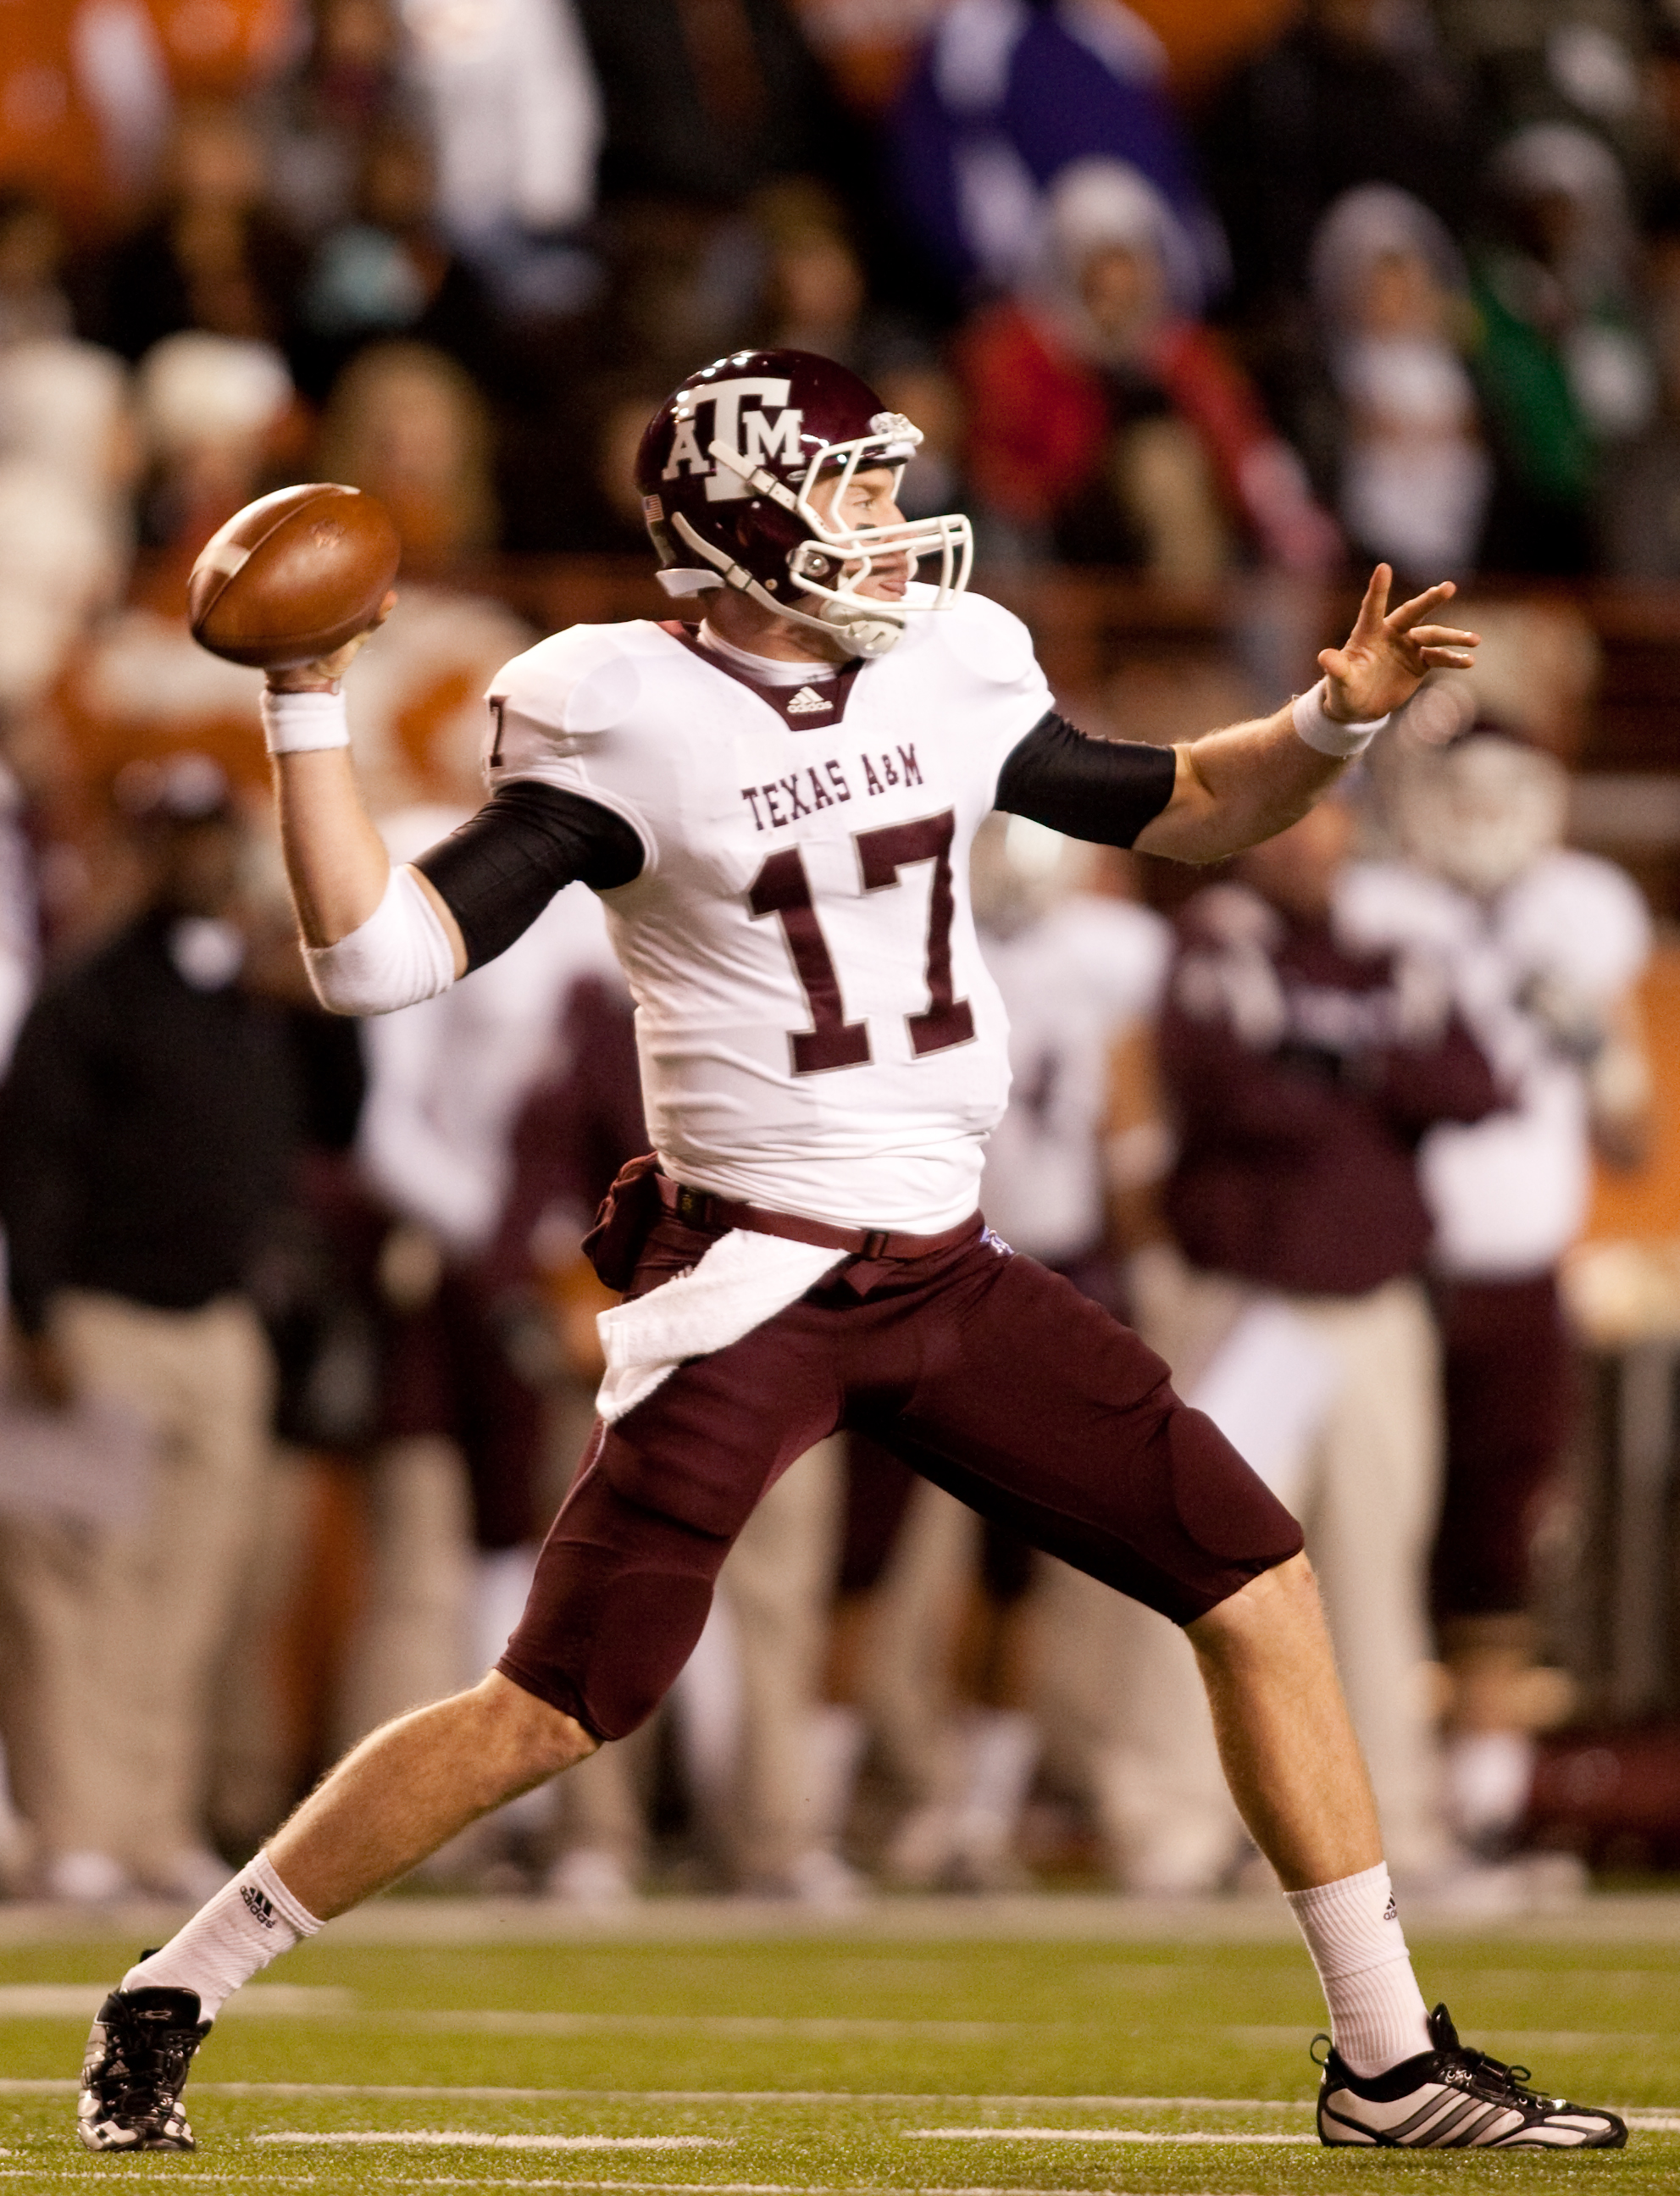 AUSTIN, TX - NOVEMBER 25:  Quarterback Ryan Tannehill #17 of Texas A&M passes against the University of Texas during the second half at Darrell K. Royal-Texas Memorial Stadium on November 25, 2010 in Austin, Texas. (Photo by Darren Carroll/Getty Images)